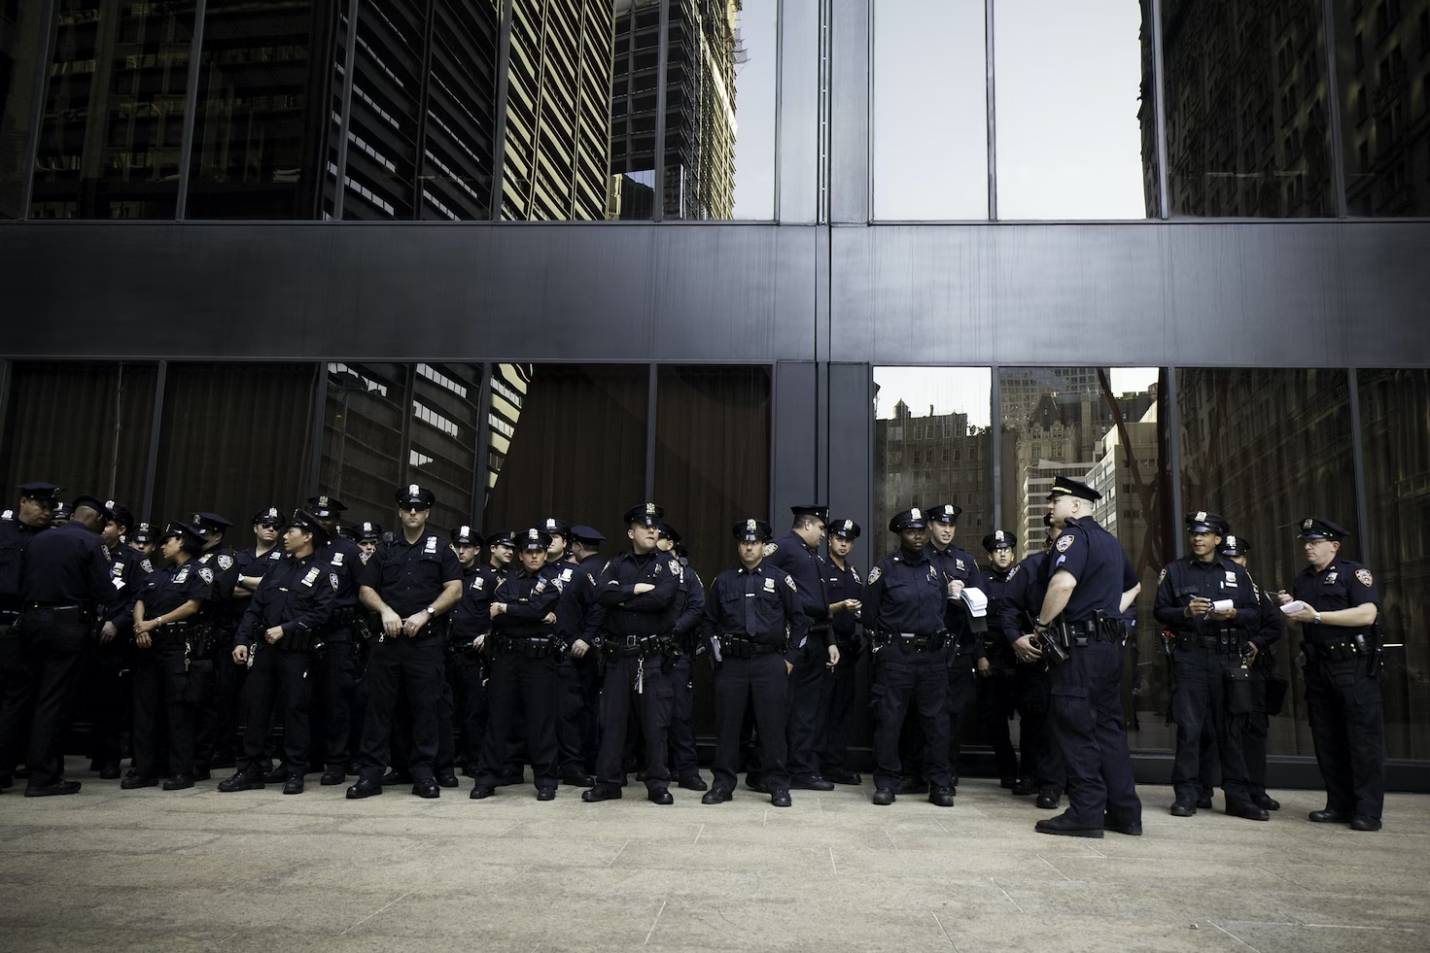 A large group of uniformed security guards outside a building